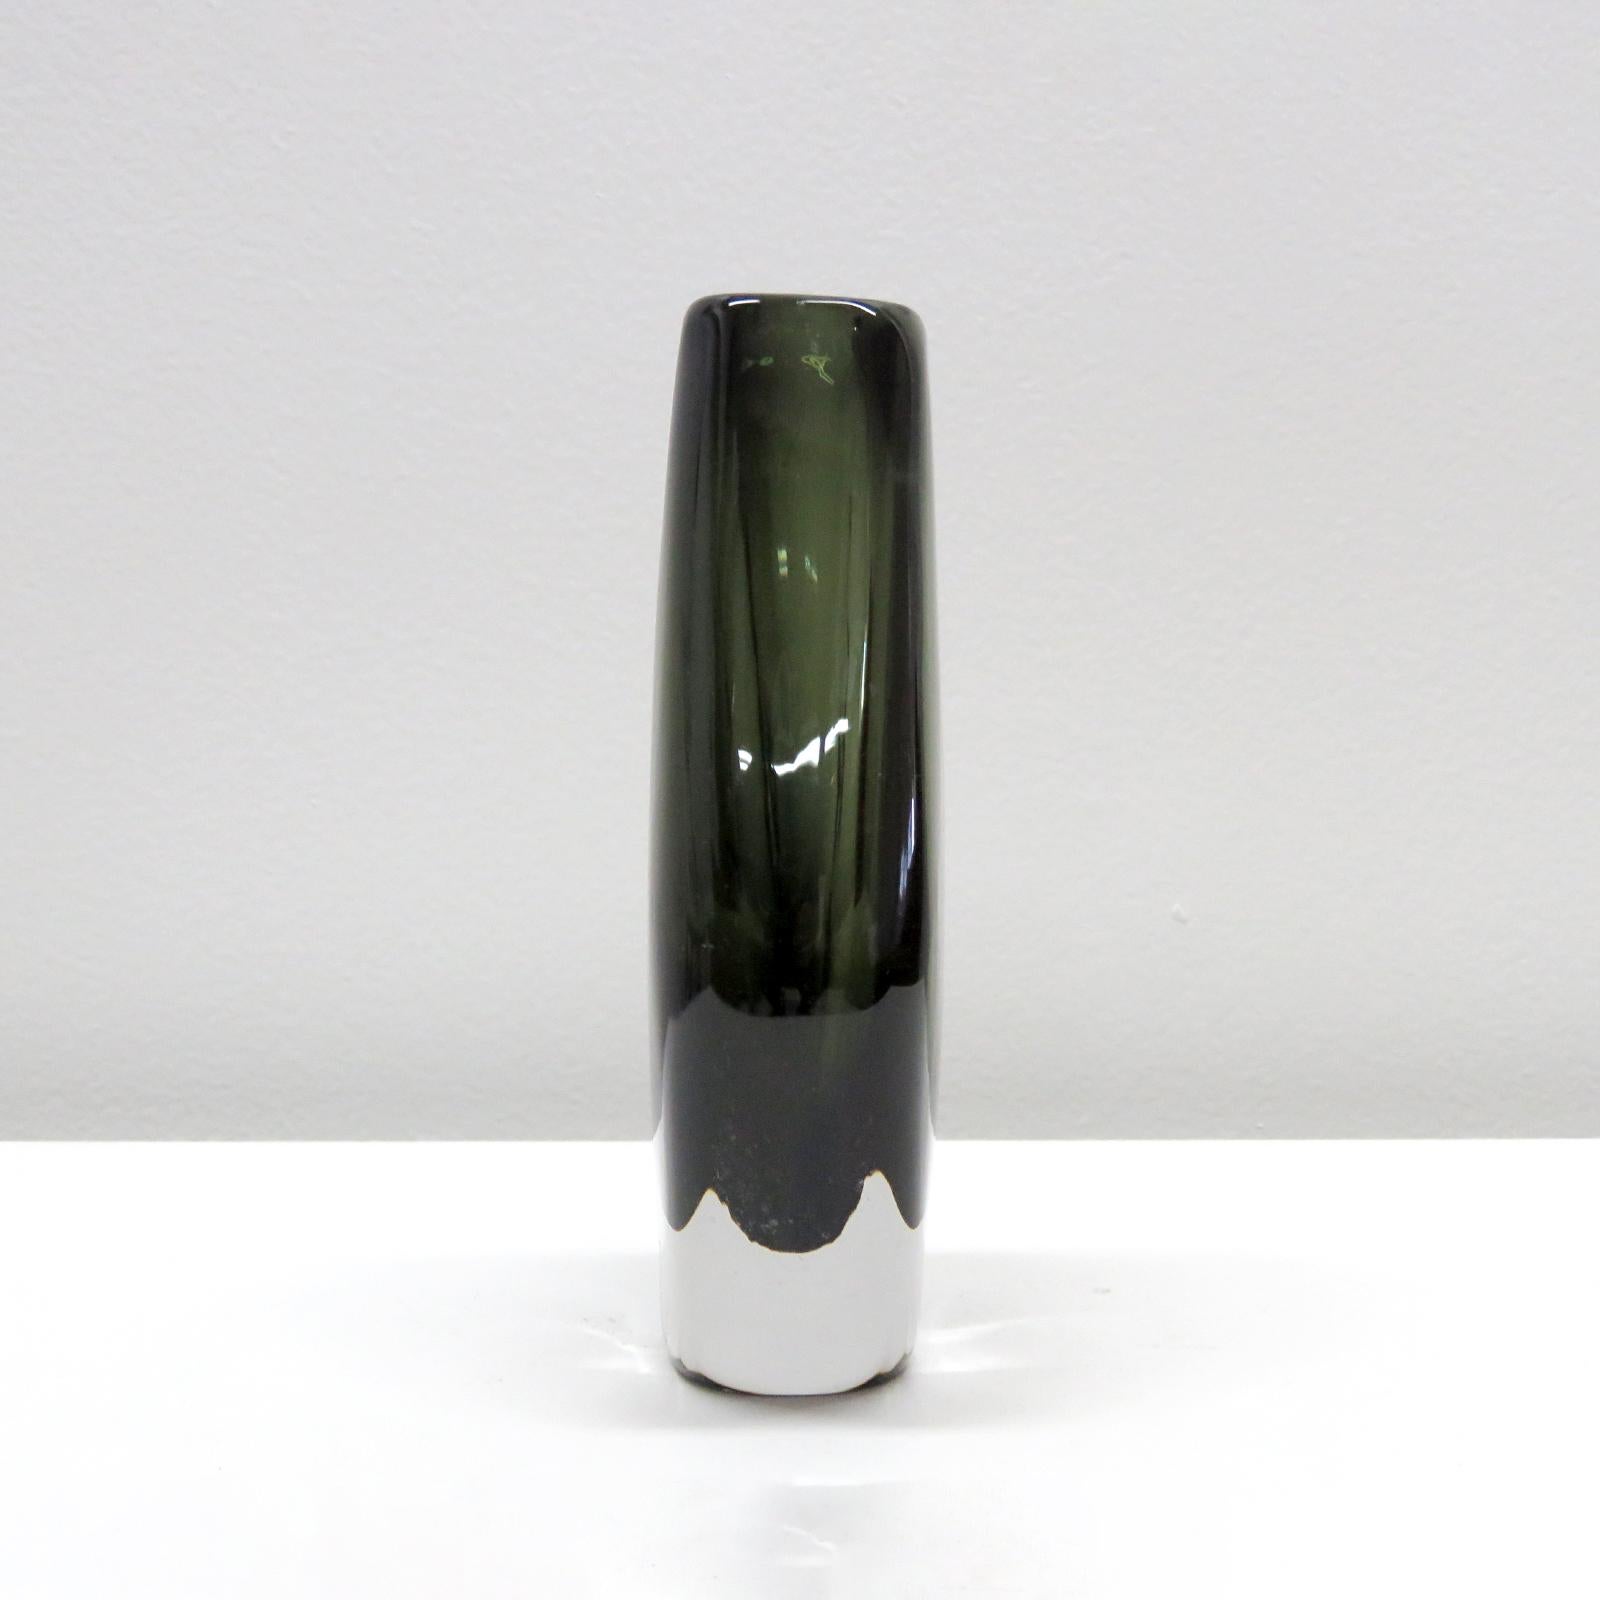 Stunning handblown, art glass 'Sommerso' vase designed by Nils Landberg and produced by Orrefors, Sweden, 1960s in grey-green hues.